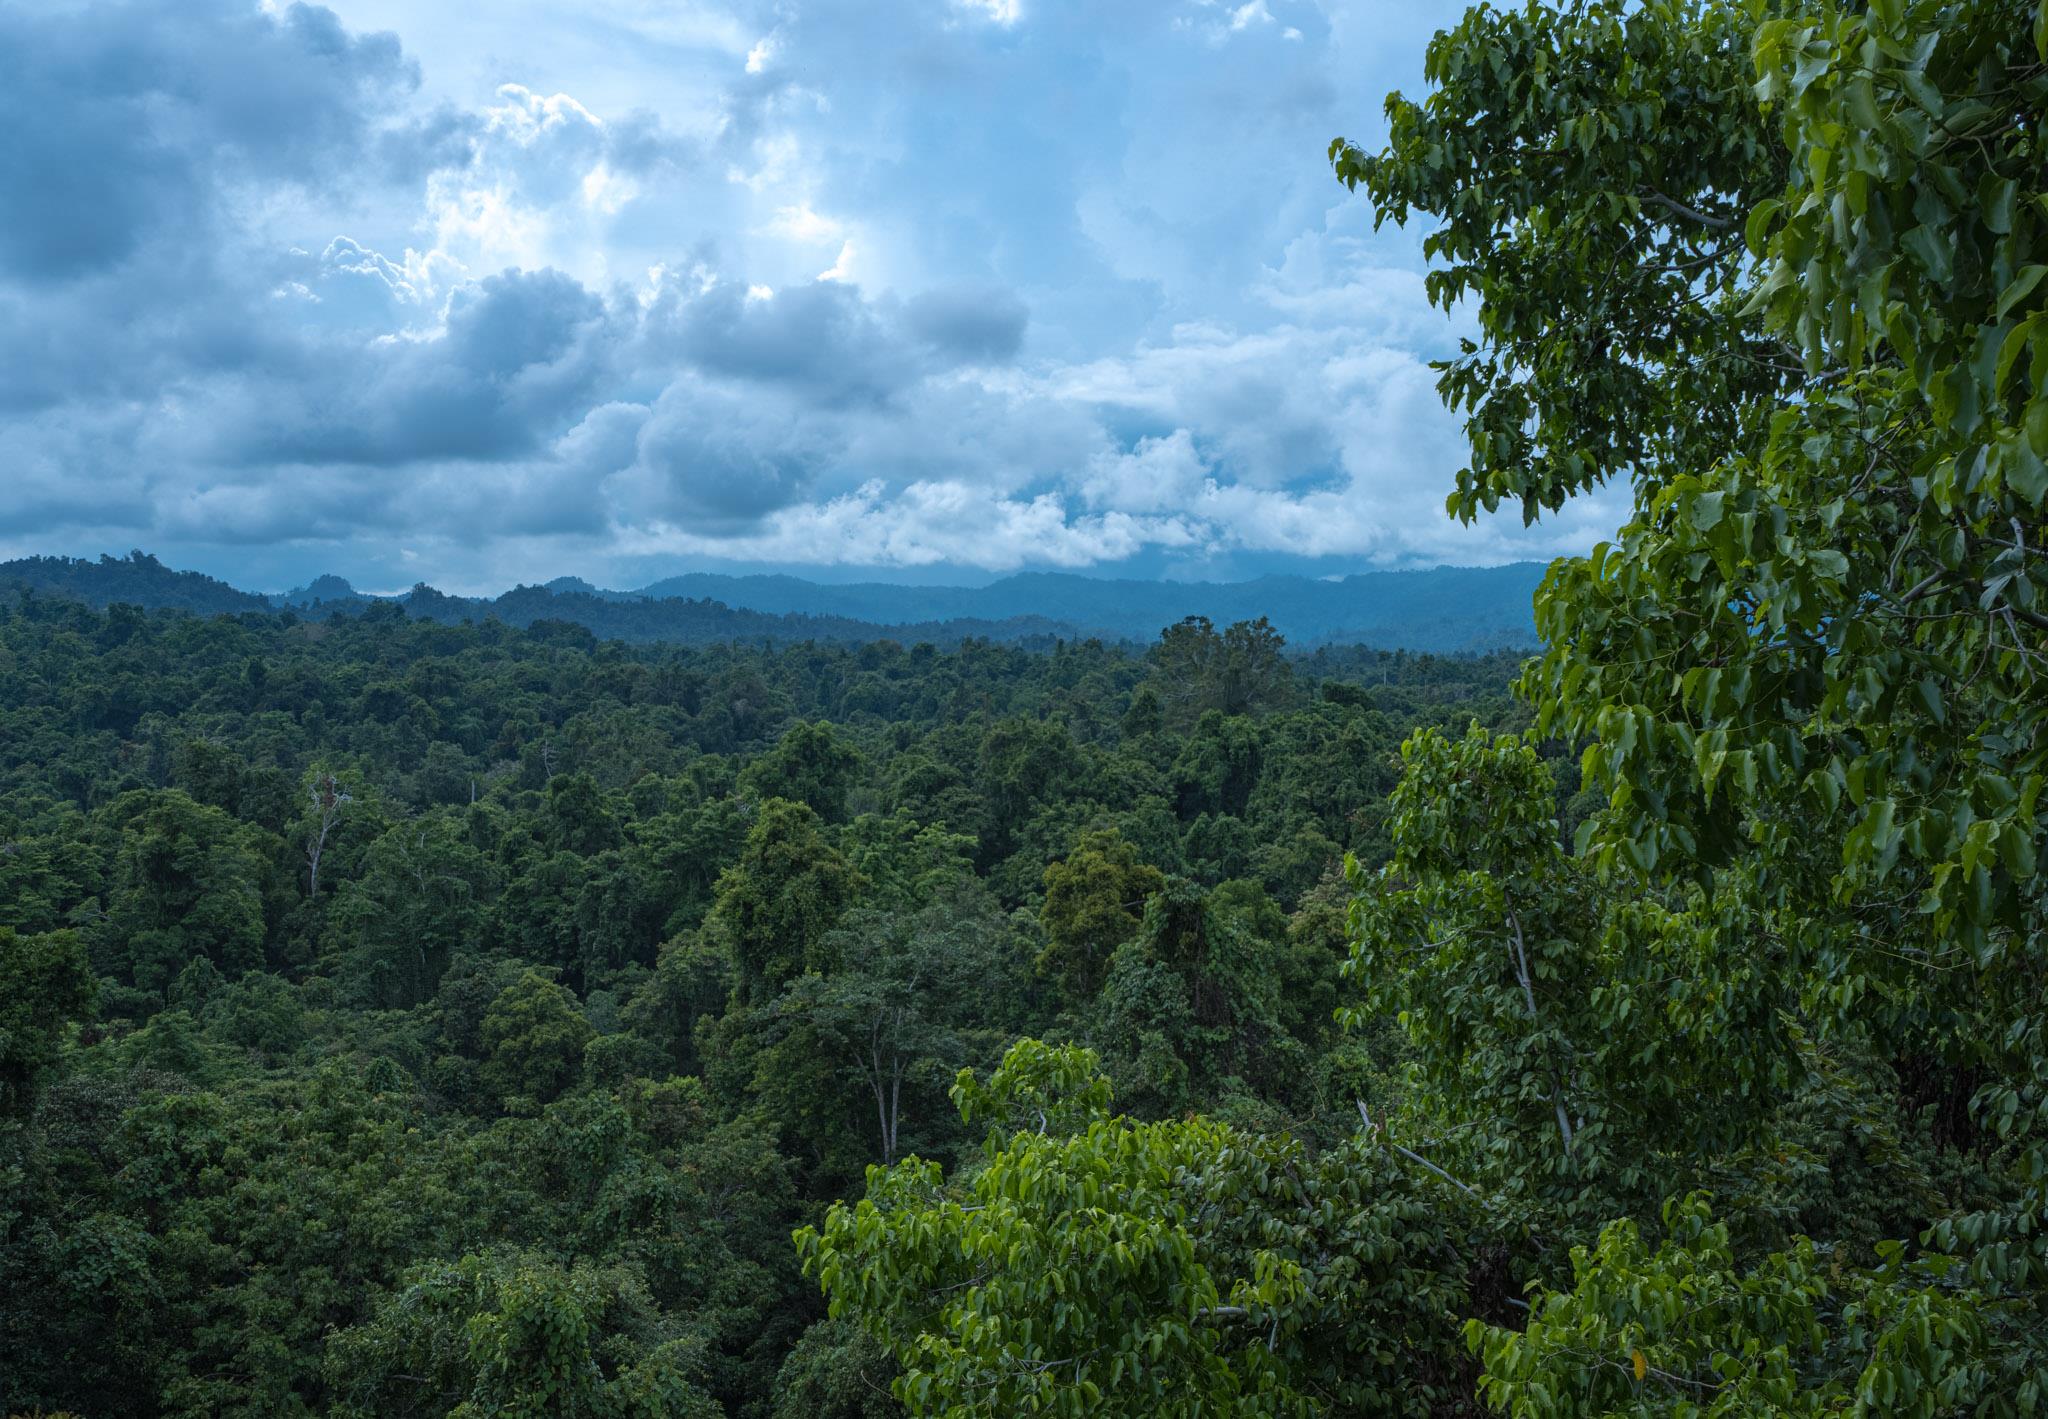 A view across primary forest canopy at Baitabag village, Madang Province, Papua New Guinea with cloudy sky in the distance. 